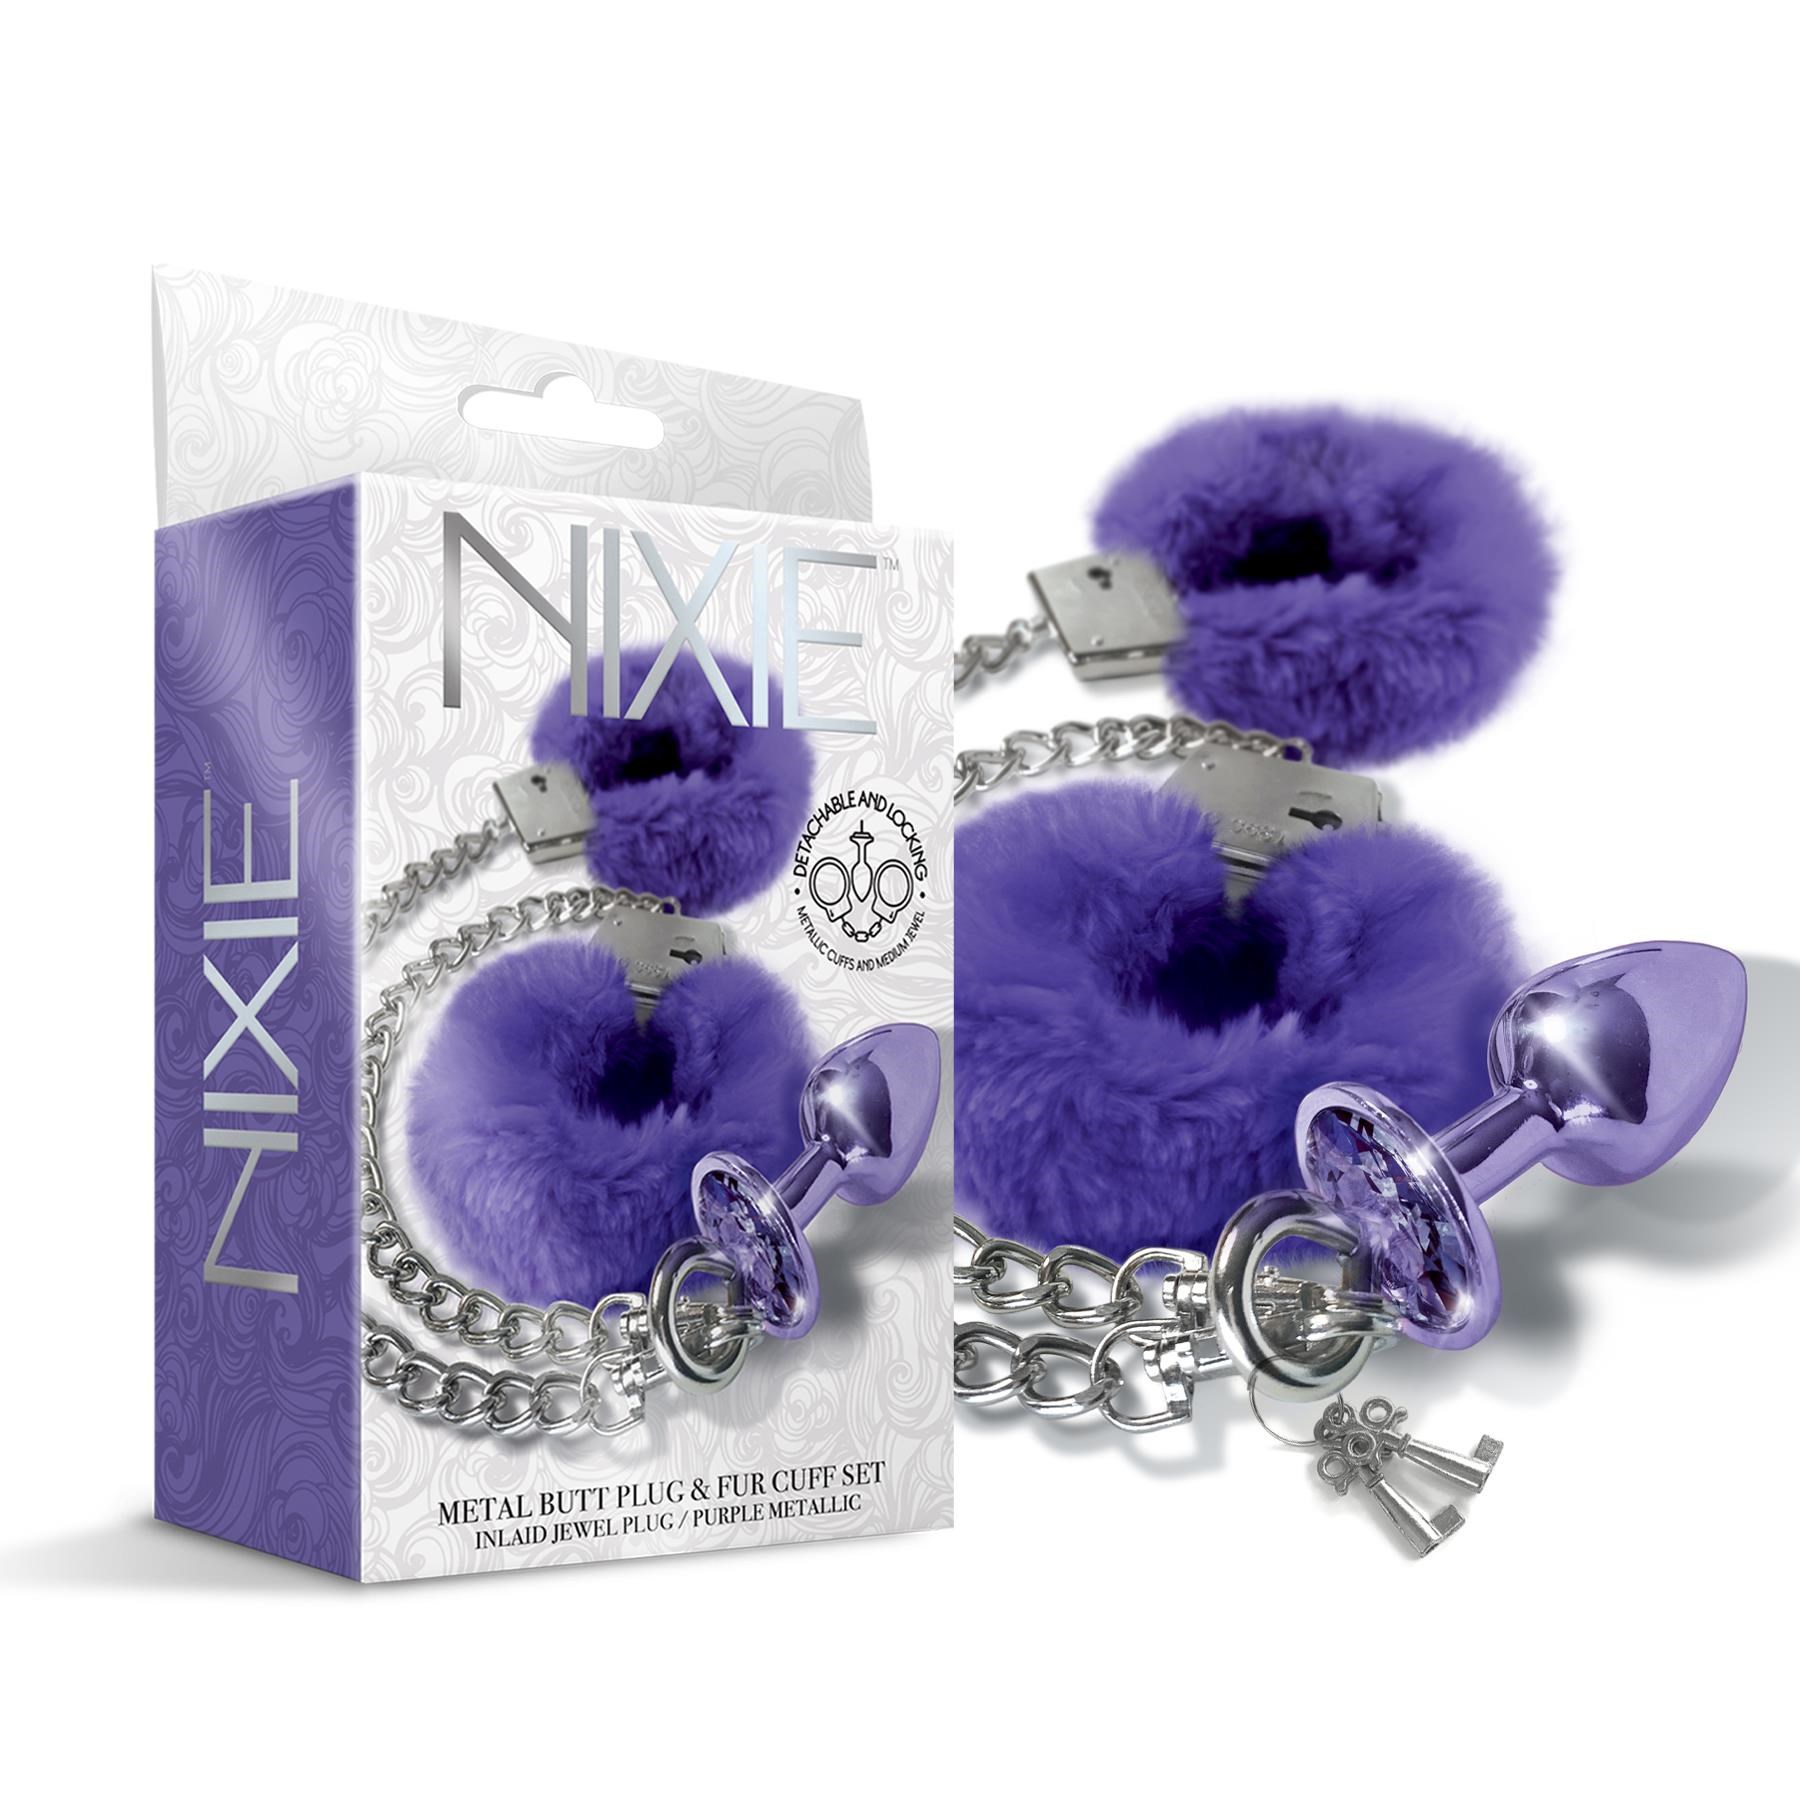 Nixie Metal Butt Plug and Fur Cuff Set - Product and Packaging Shot - Purple